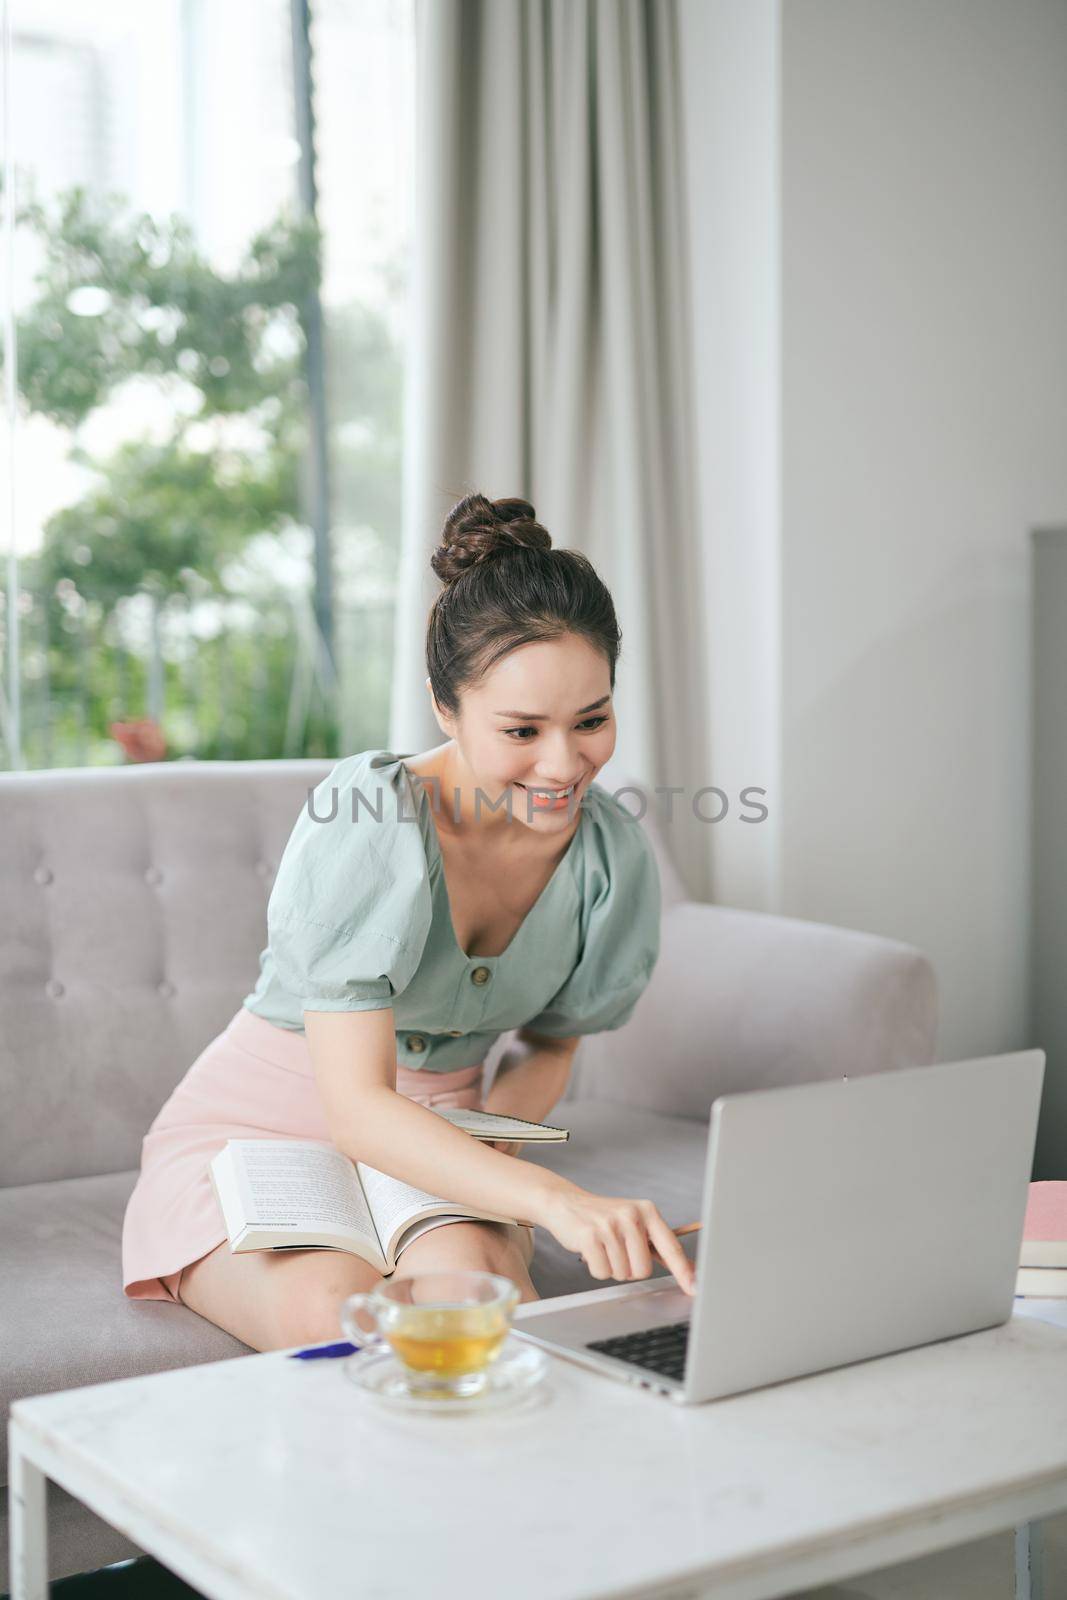 Smiling woman sitting thinking in an office chair as she mulls over a new idea in her mind